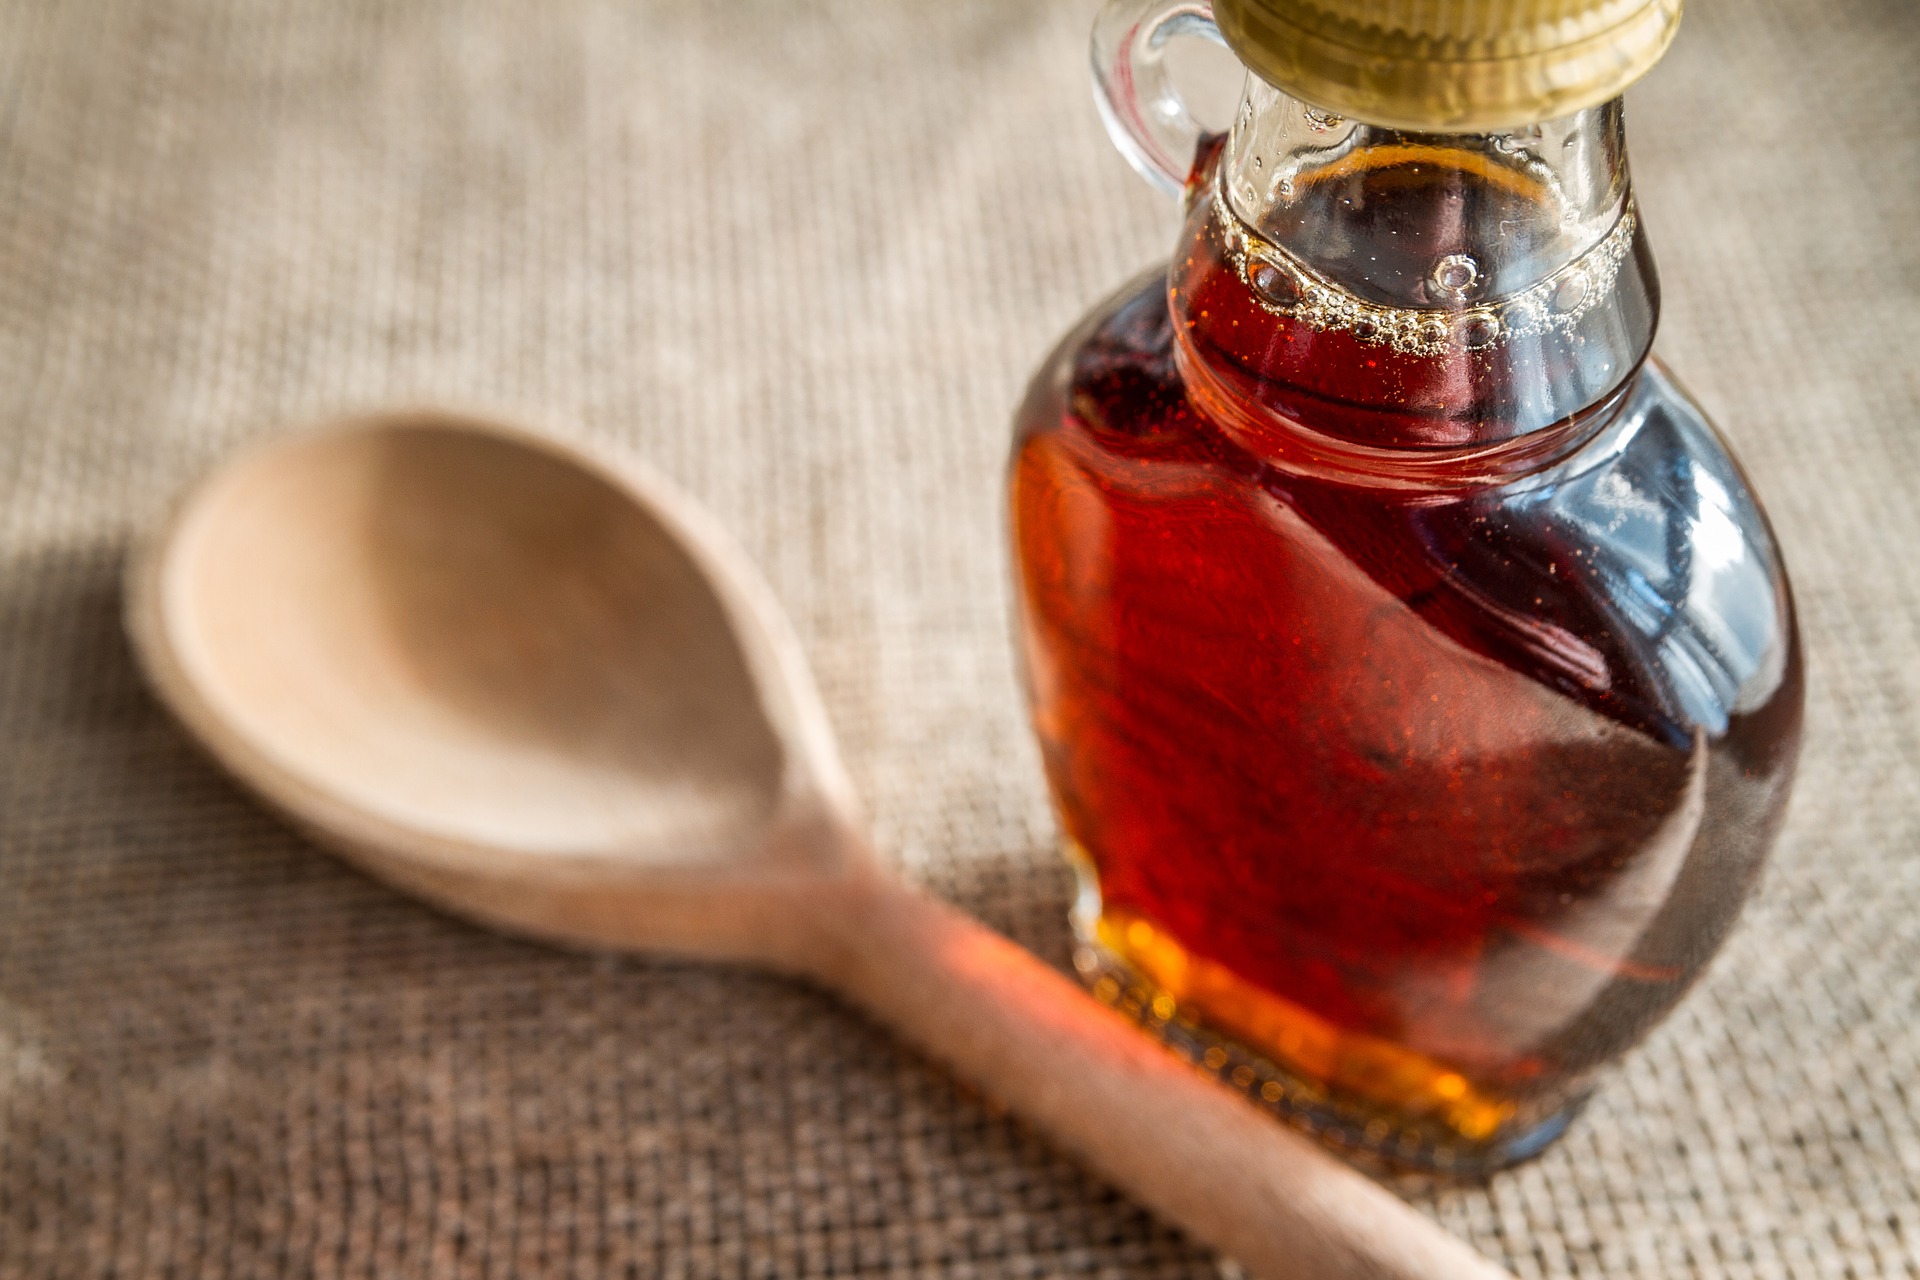 Canada is tapping into its emergency reserve because of demand… for maple syrup